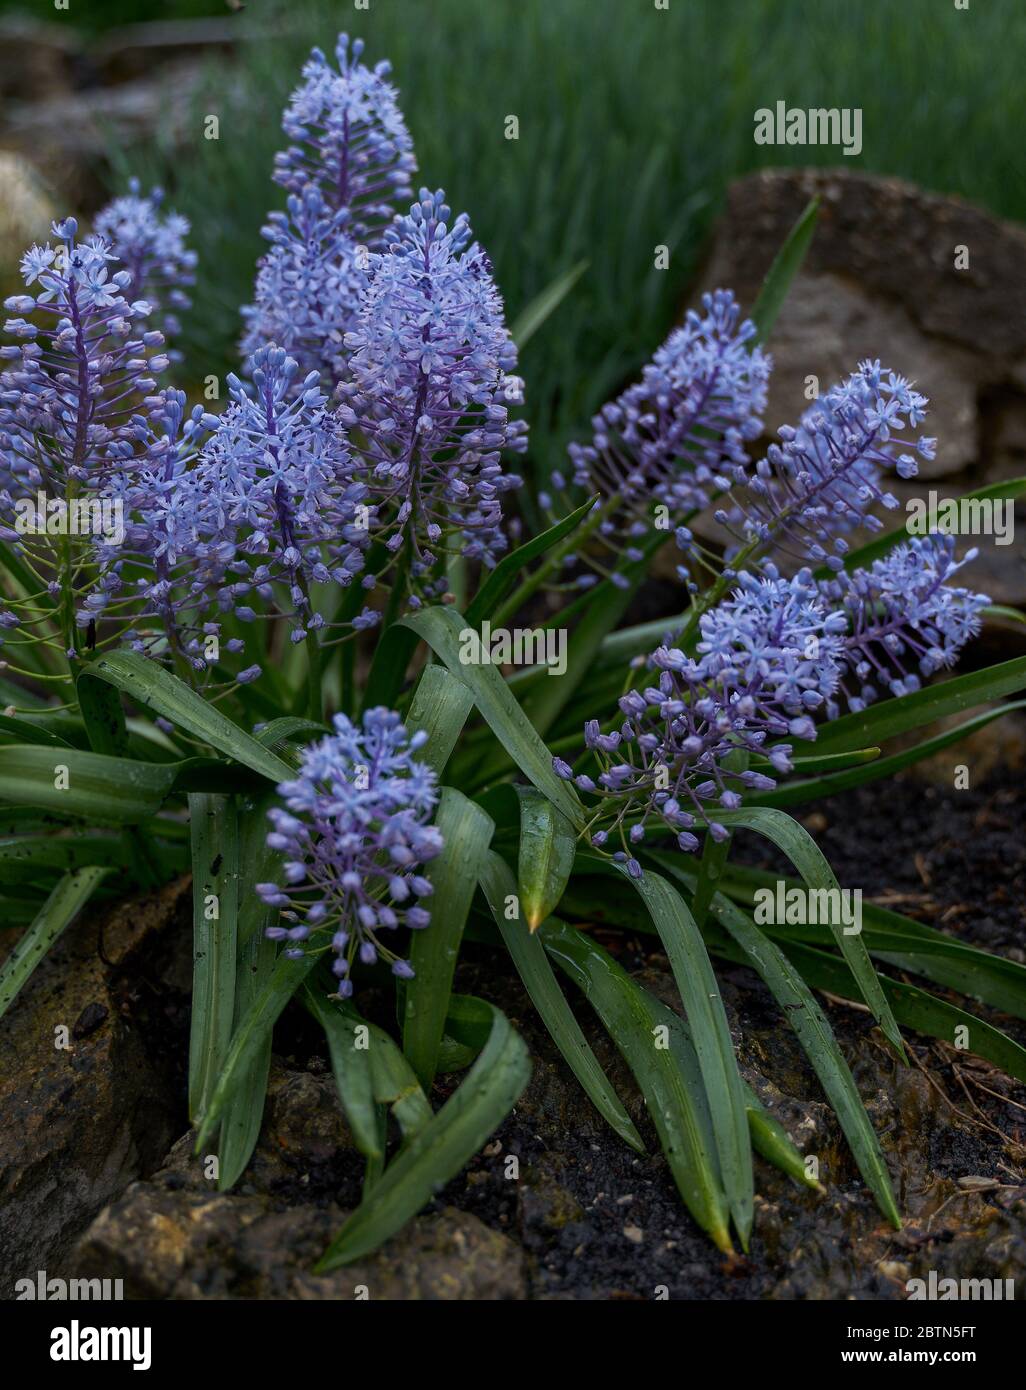 Scilla litardierei, the amethyst meadow squill or Dalmatian scilla blooming Stock Photo